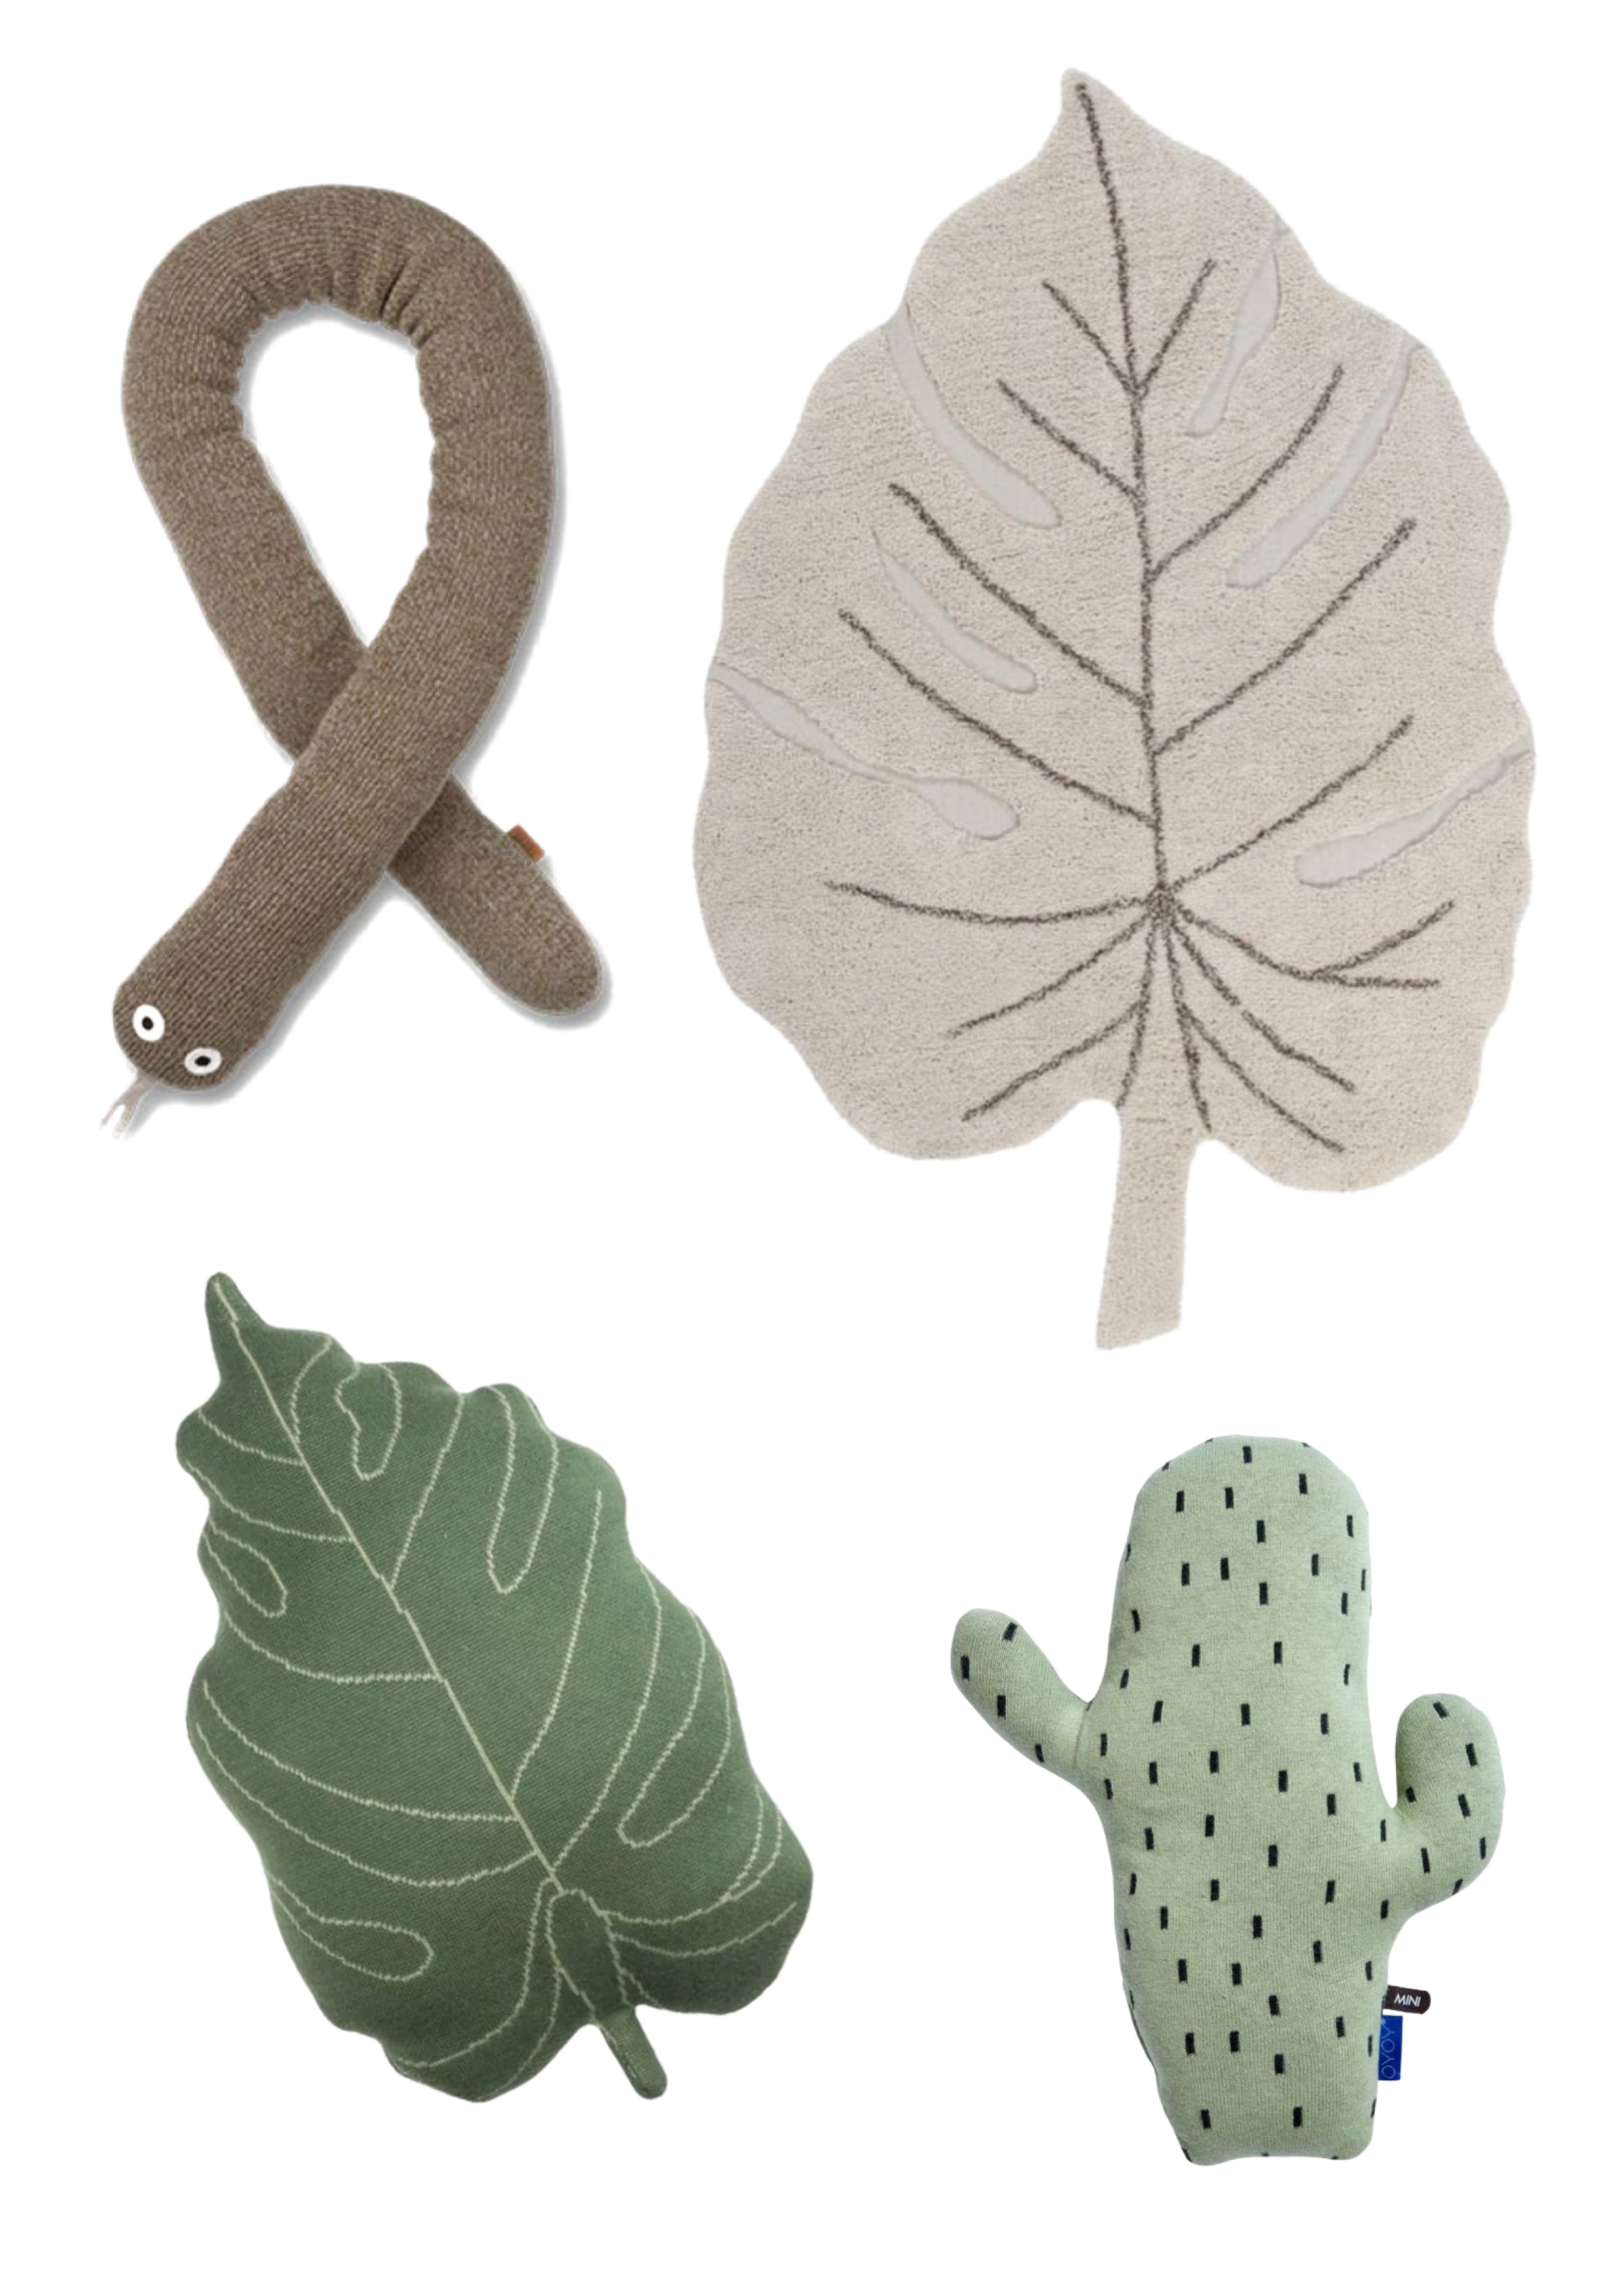 lorena-canals-monstera-leaf-rug-cushion-oyoy-living-cactus-snake-toy-ferm-living